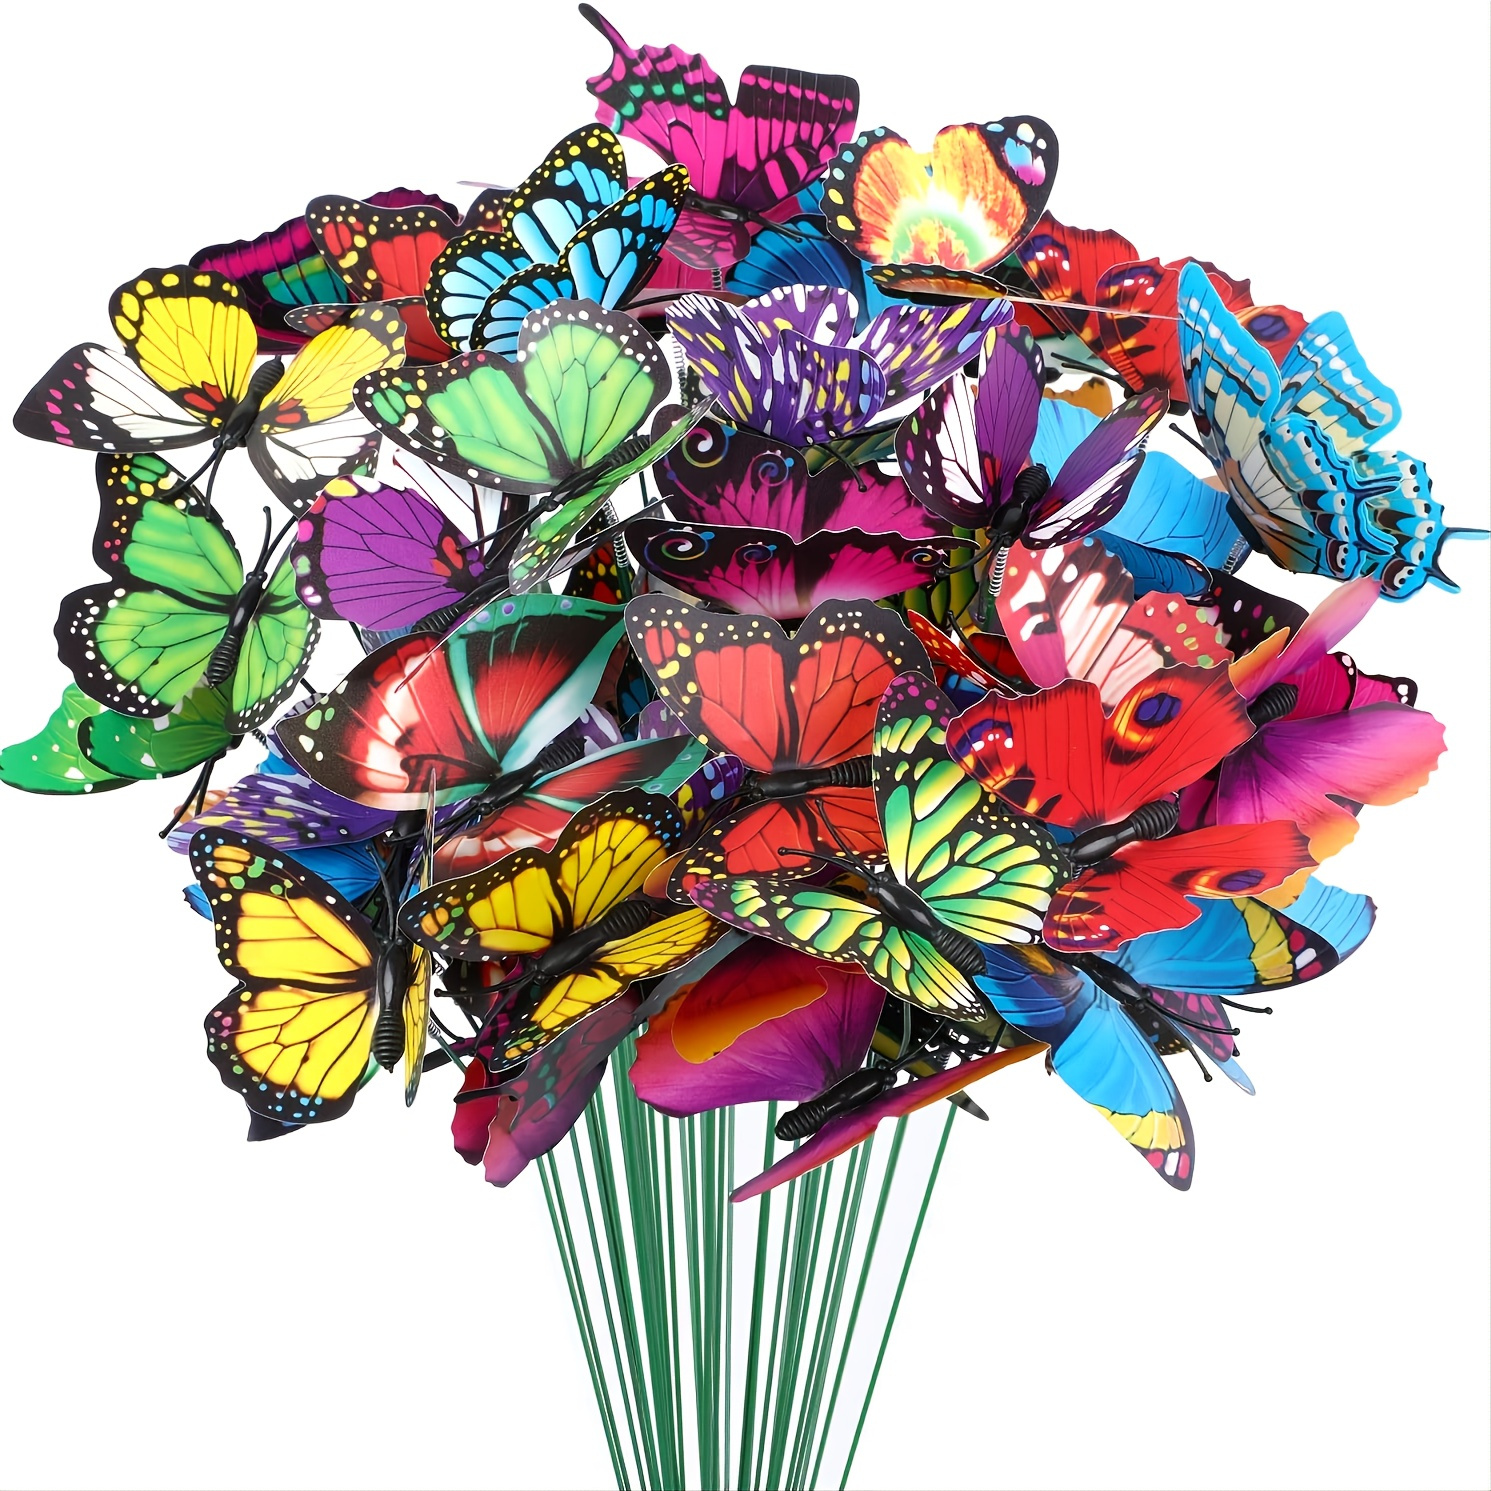 HCQXNSL 50pcs 7CM Multi-Color Butterfly Stakes Waterproof Fake Butterflies  Ornaments Butterfly Party Supplies Decoration for Indoor Outdoor Patio  Plant Pot Flower Bed 